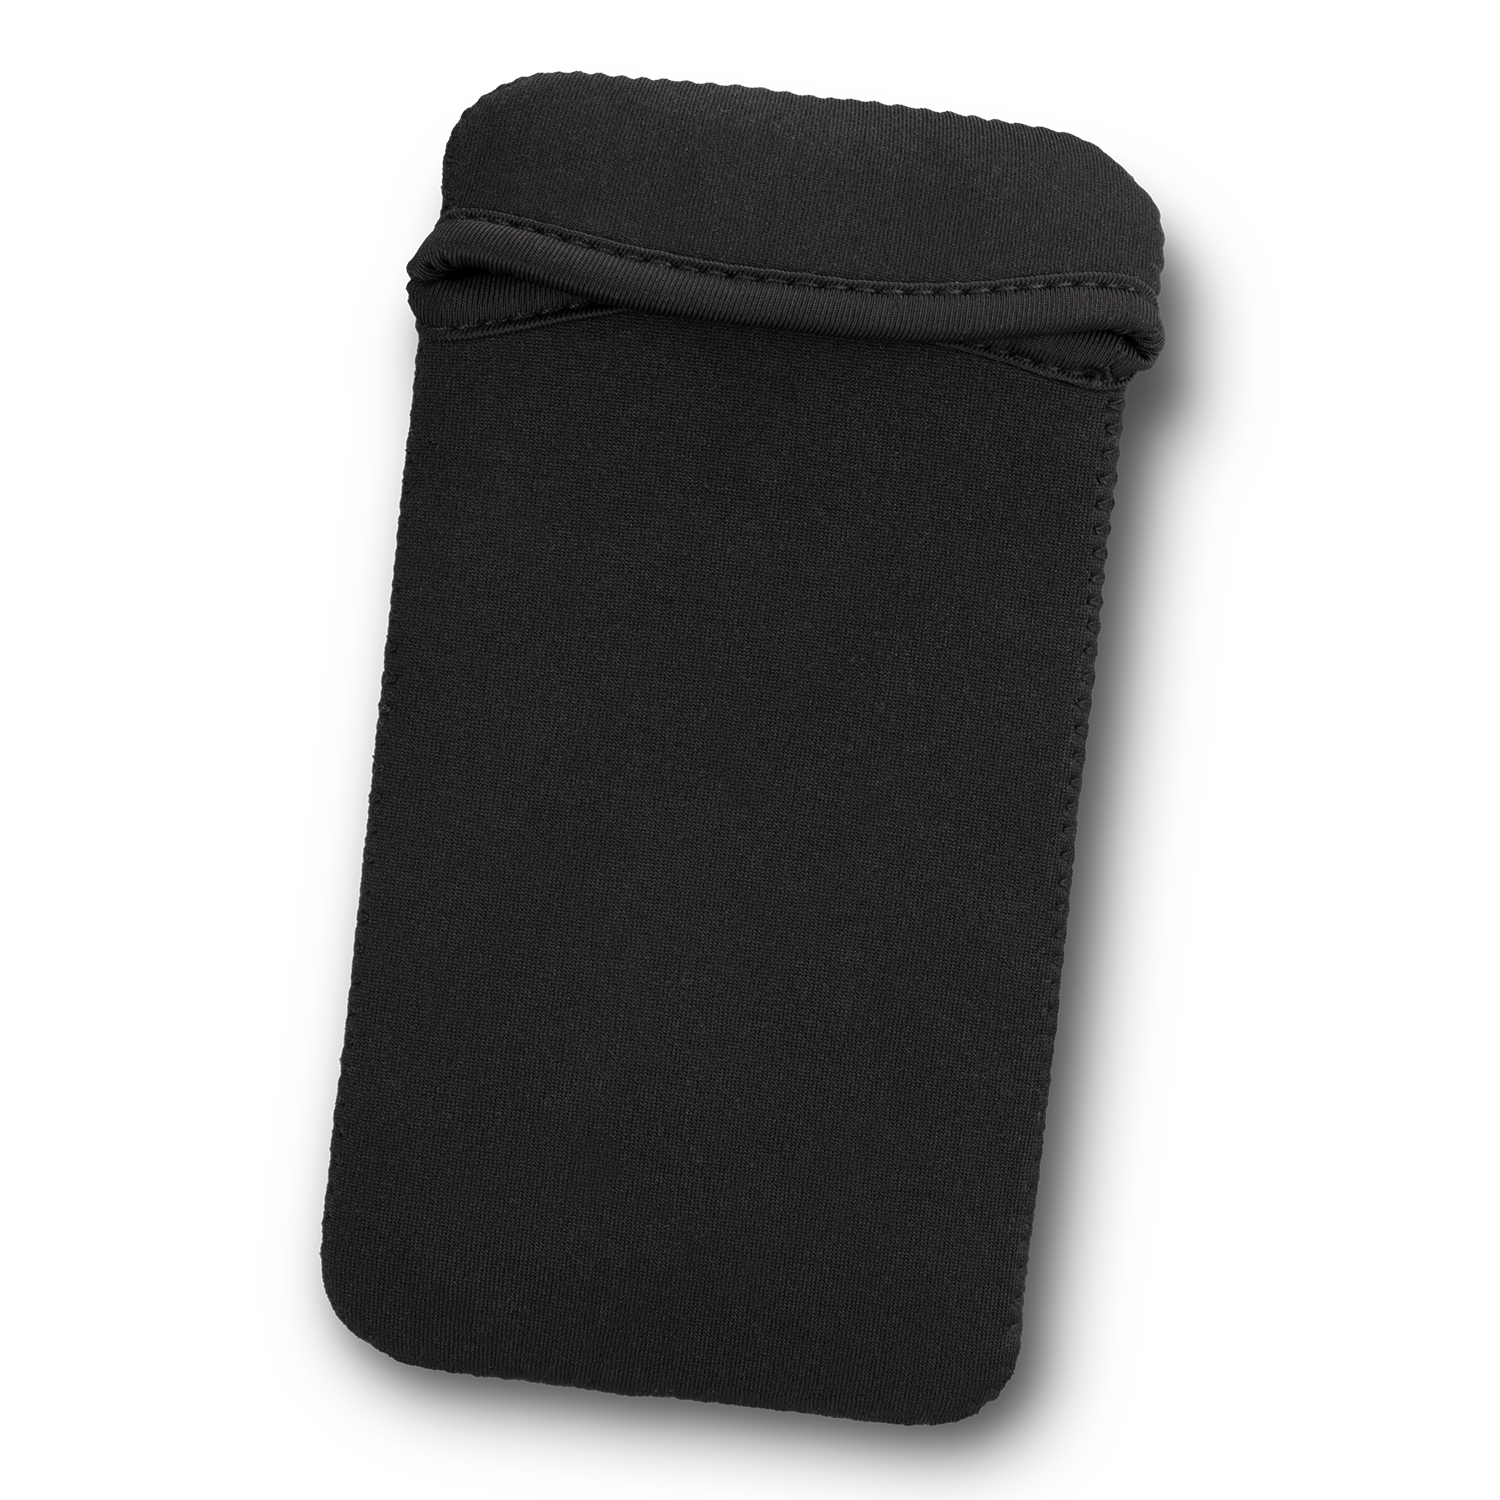 Trends Spencer Phone Pouch Phone